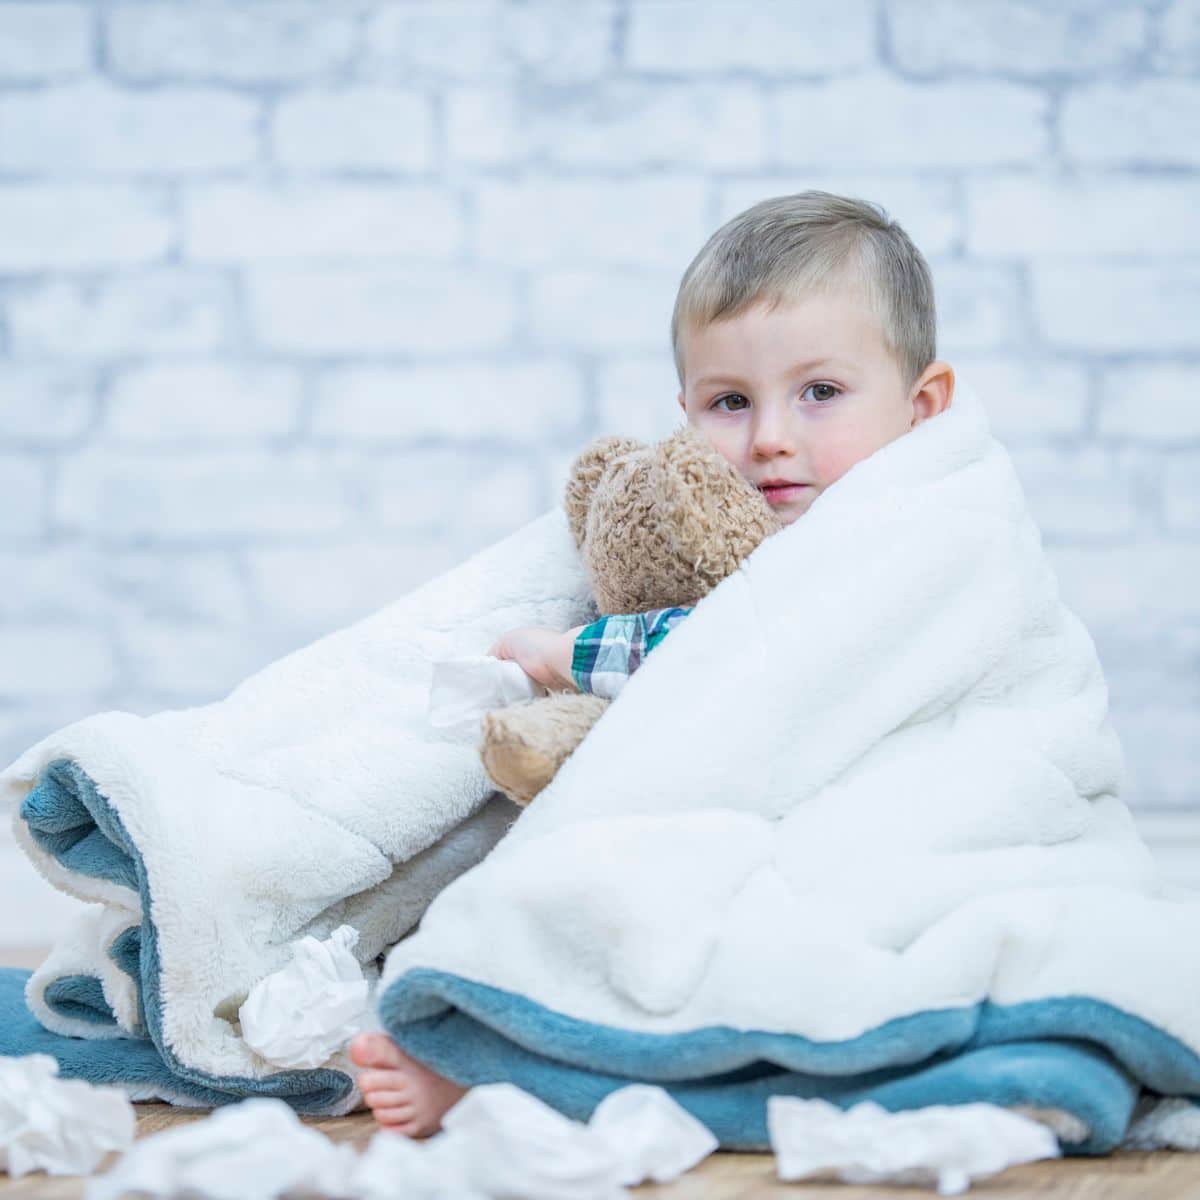 Sick looking toddler covered in a blanket holding a stuffed toy and napkins around him.